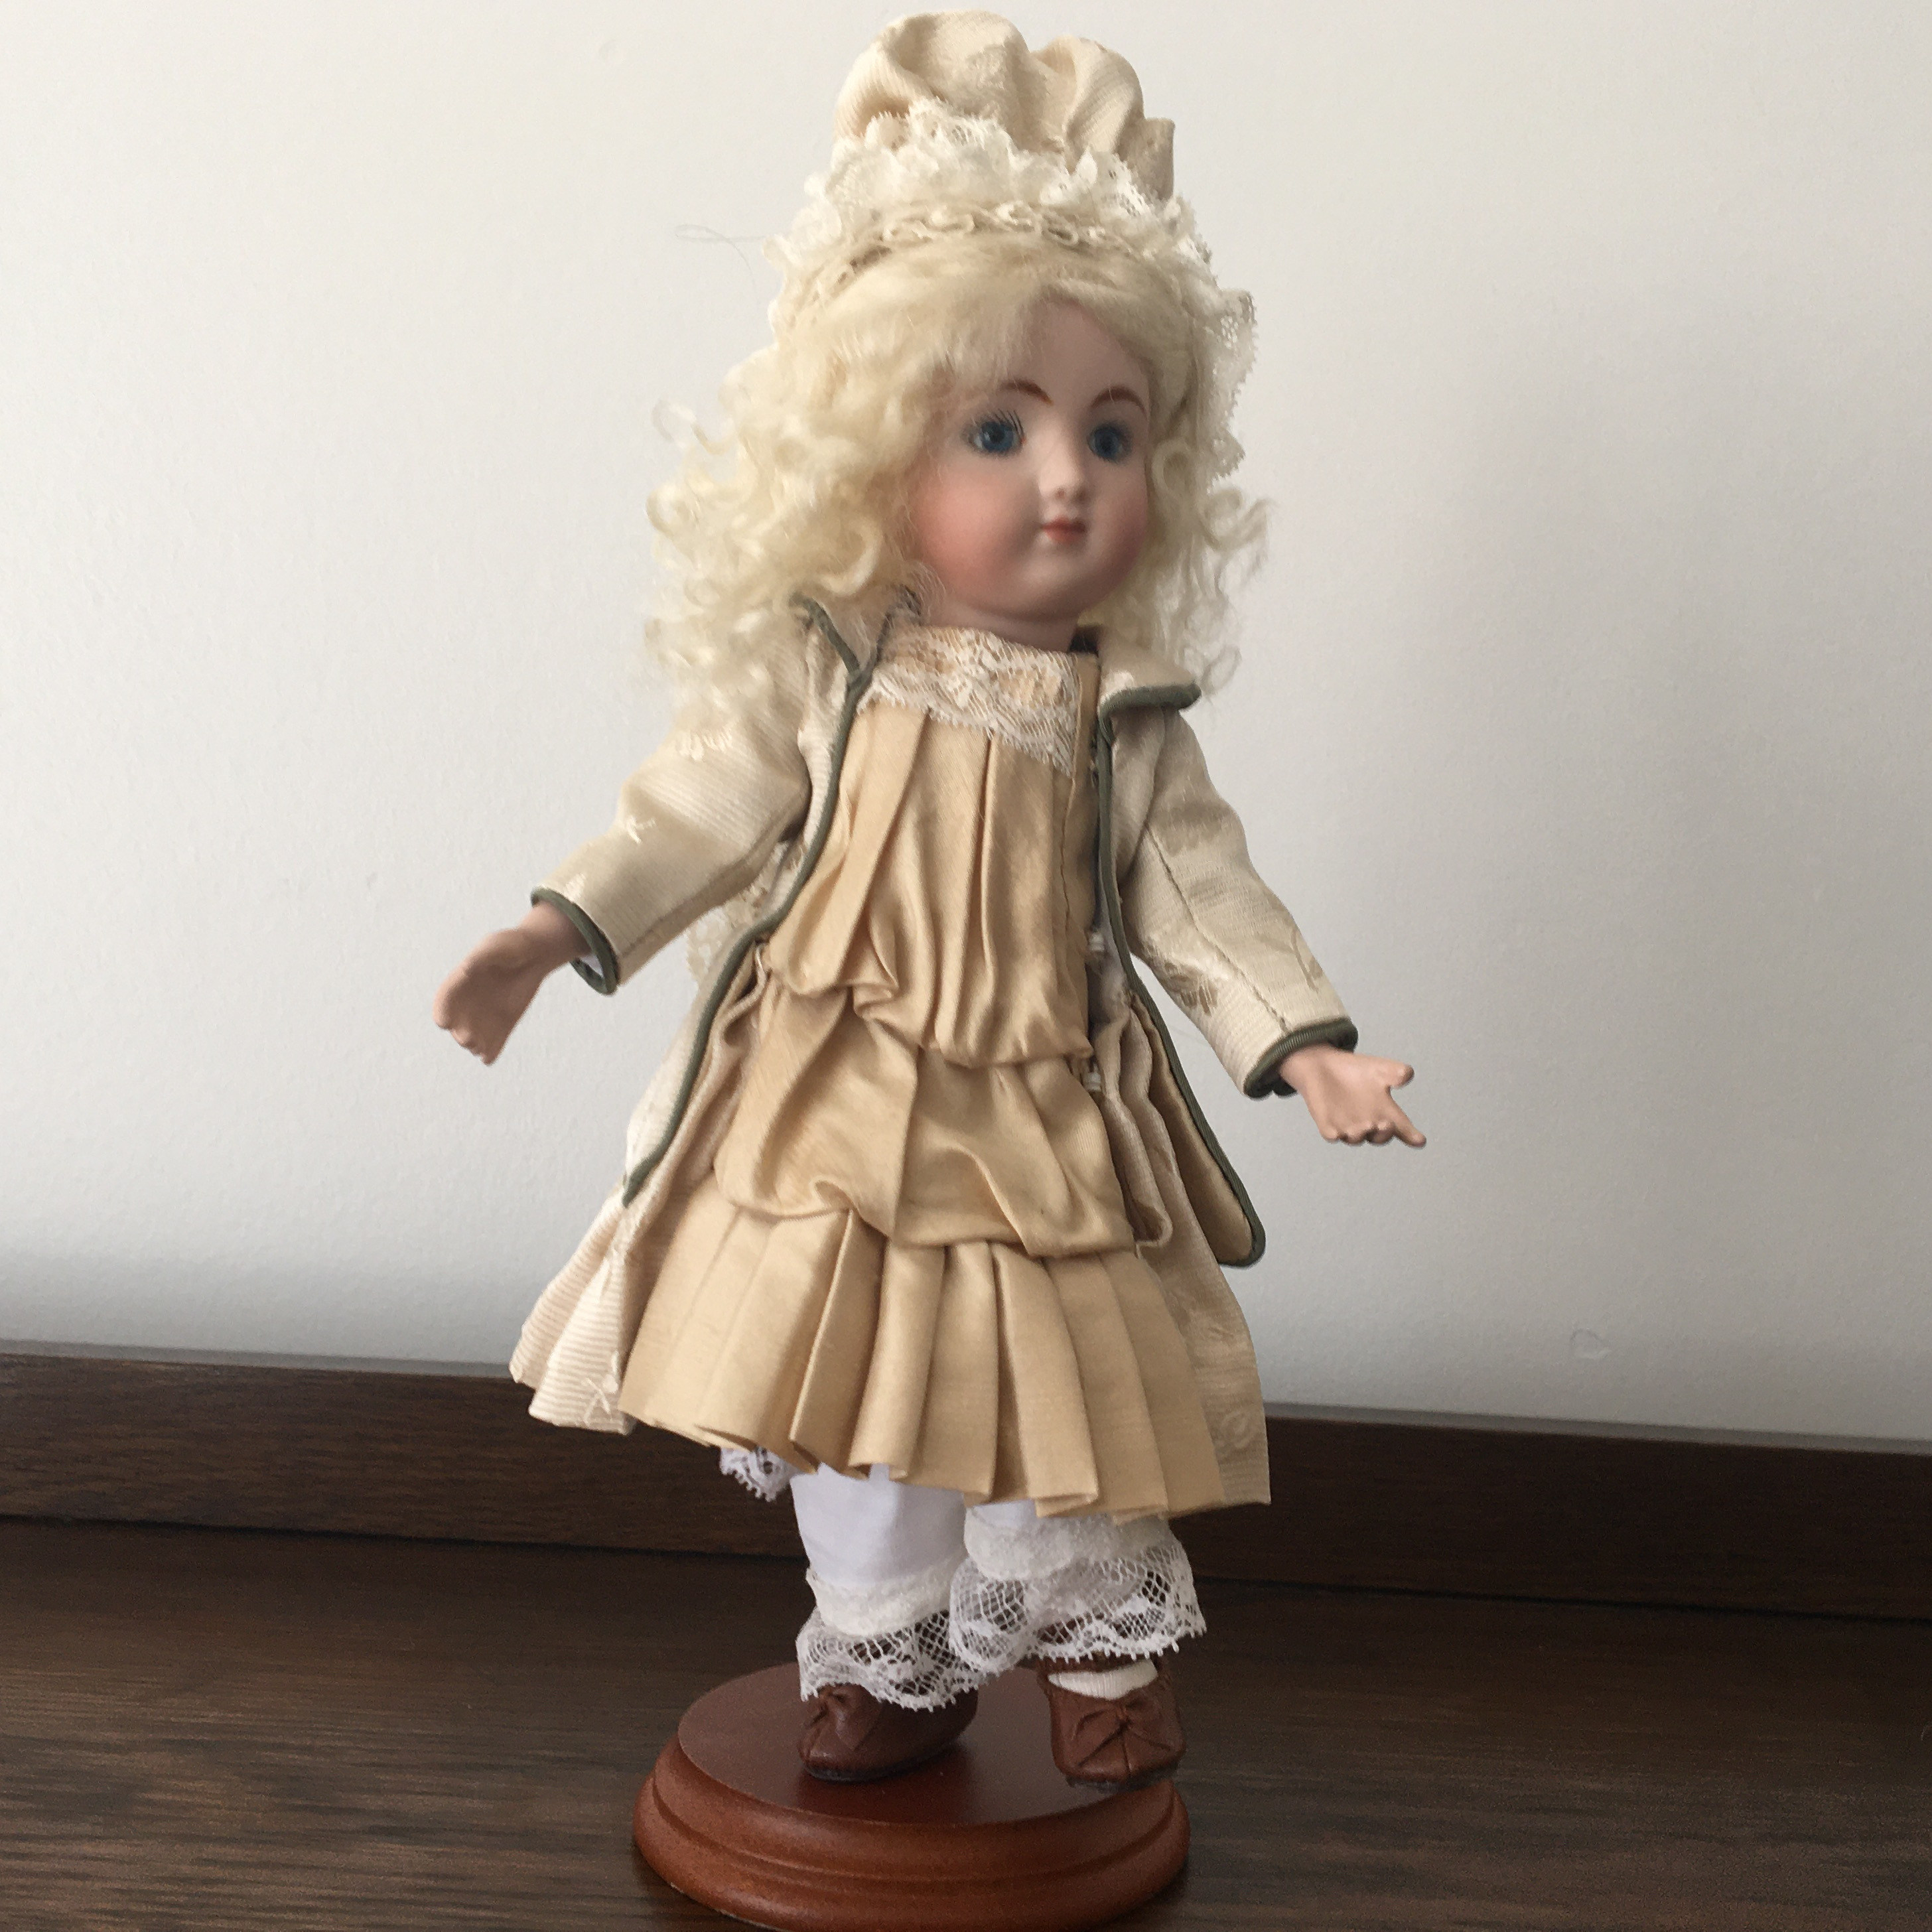 Tiny 11-inch C Steiner reproduction in beige suit, front view